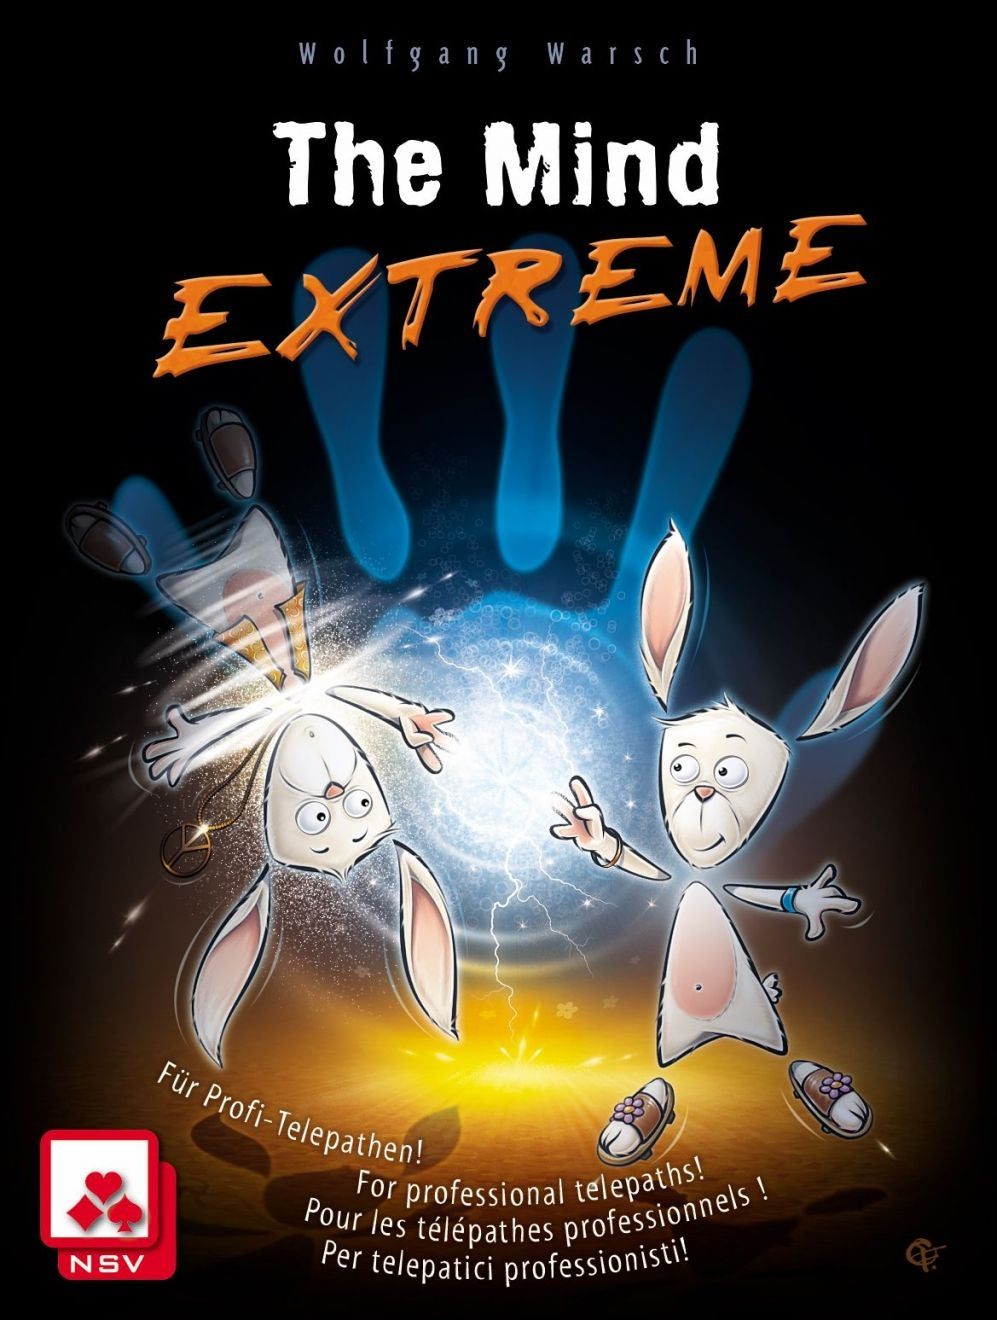 The Mind EXTREME!